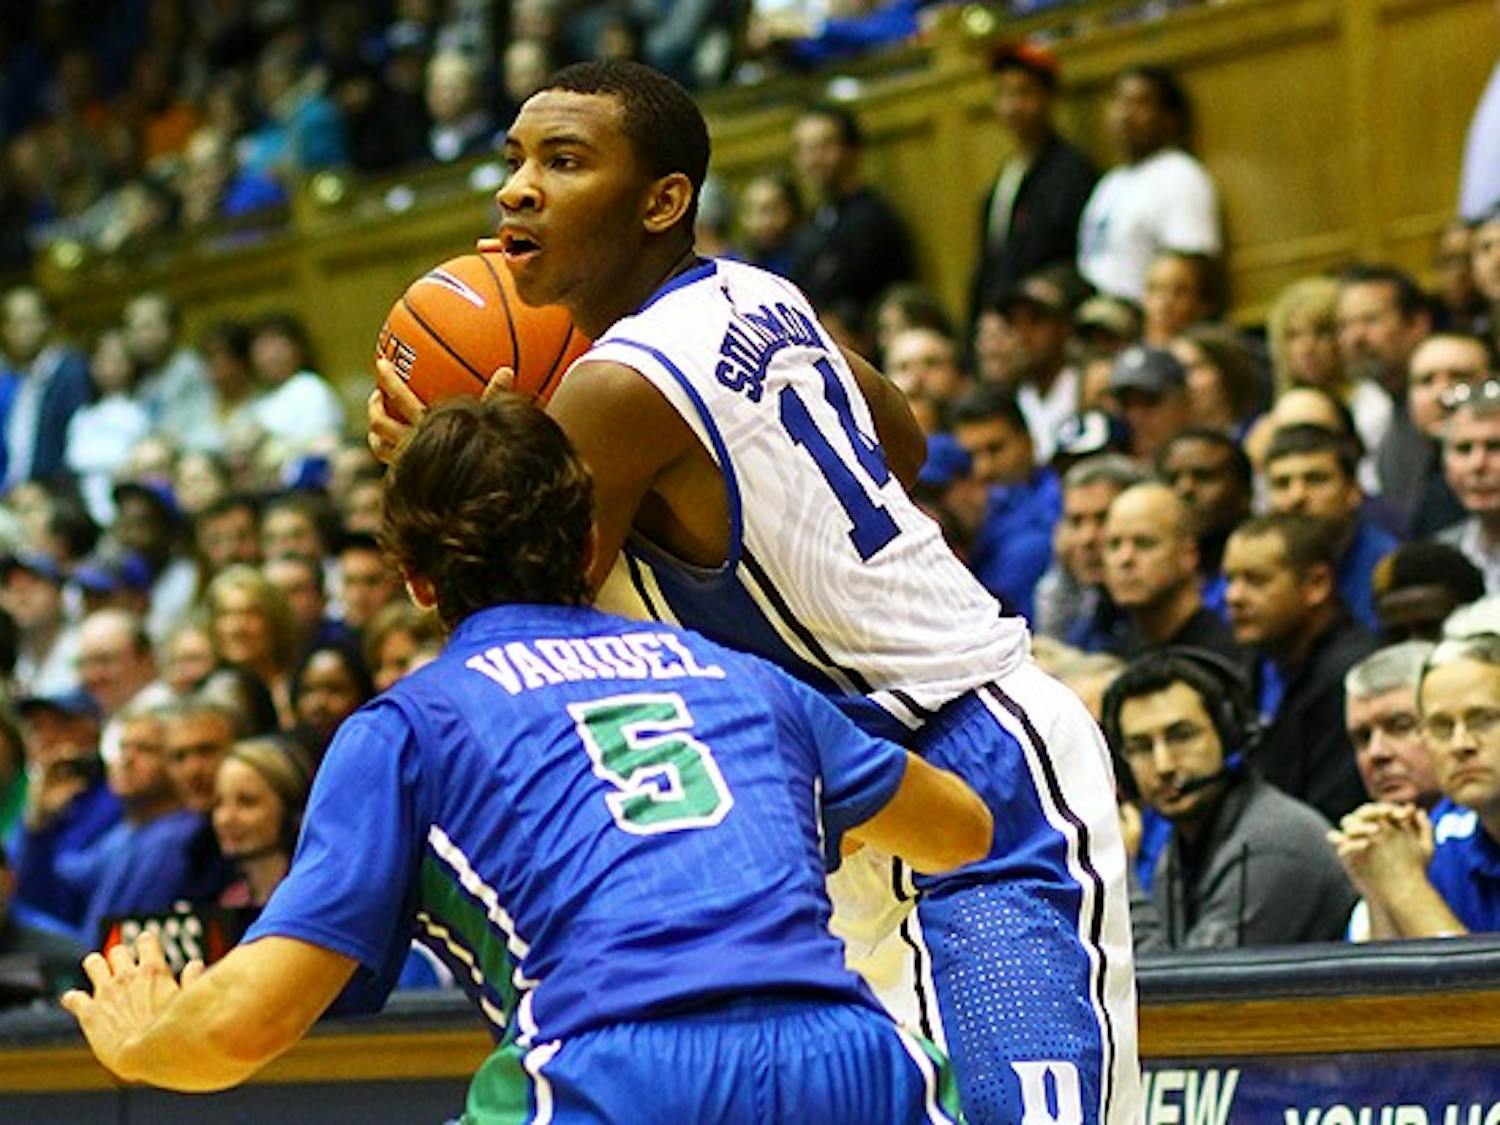 Freshman guard Rasheed Sulaimon finished second on the team with 19 points, going 5-of-12 from the field and 6-of-6 from the line.